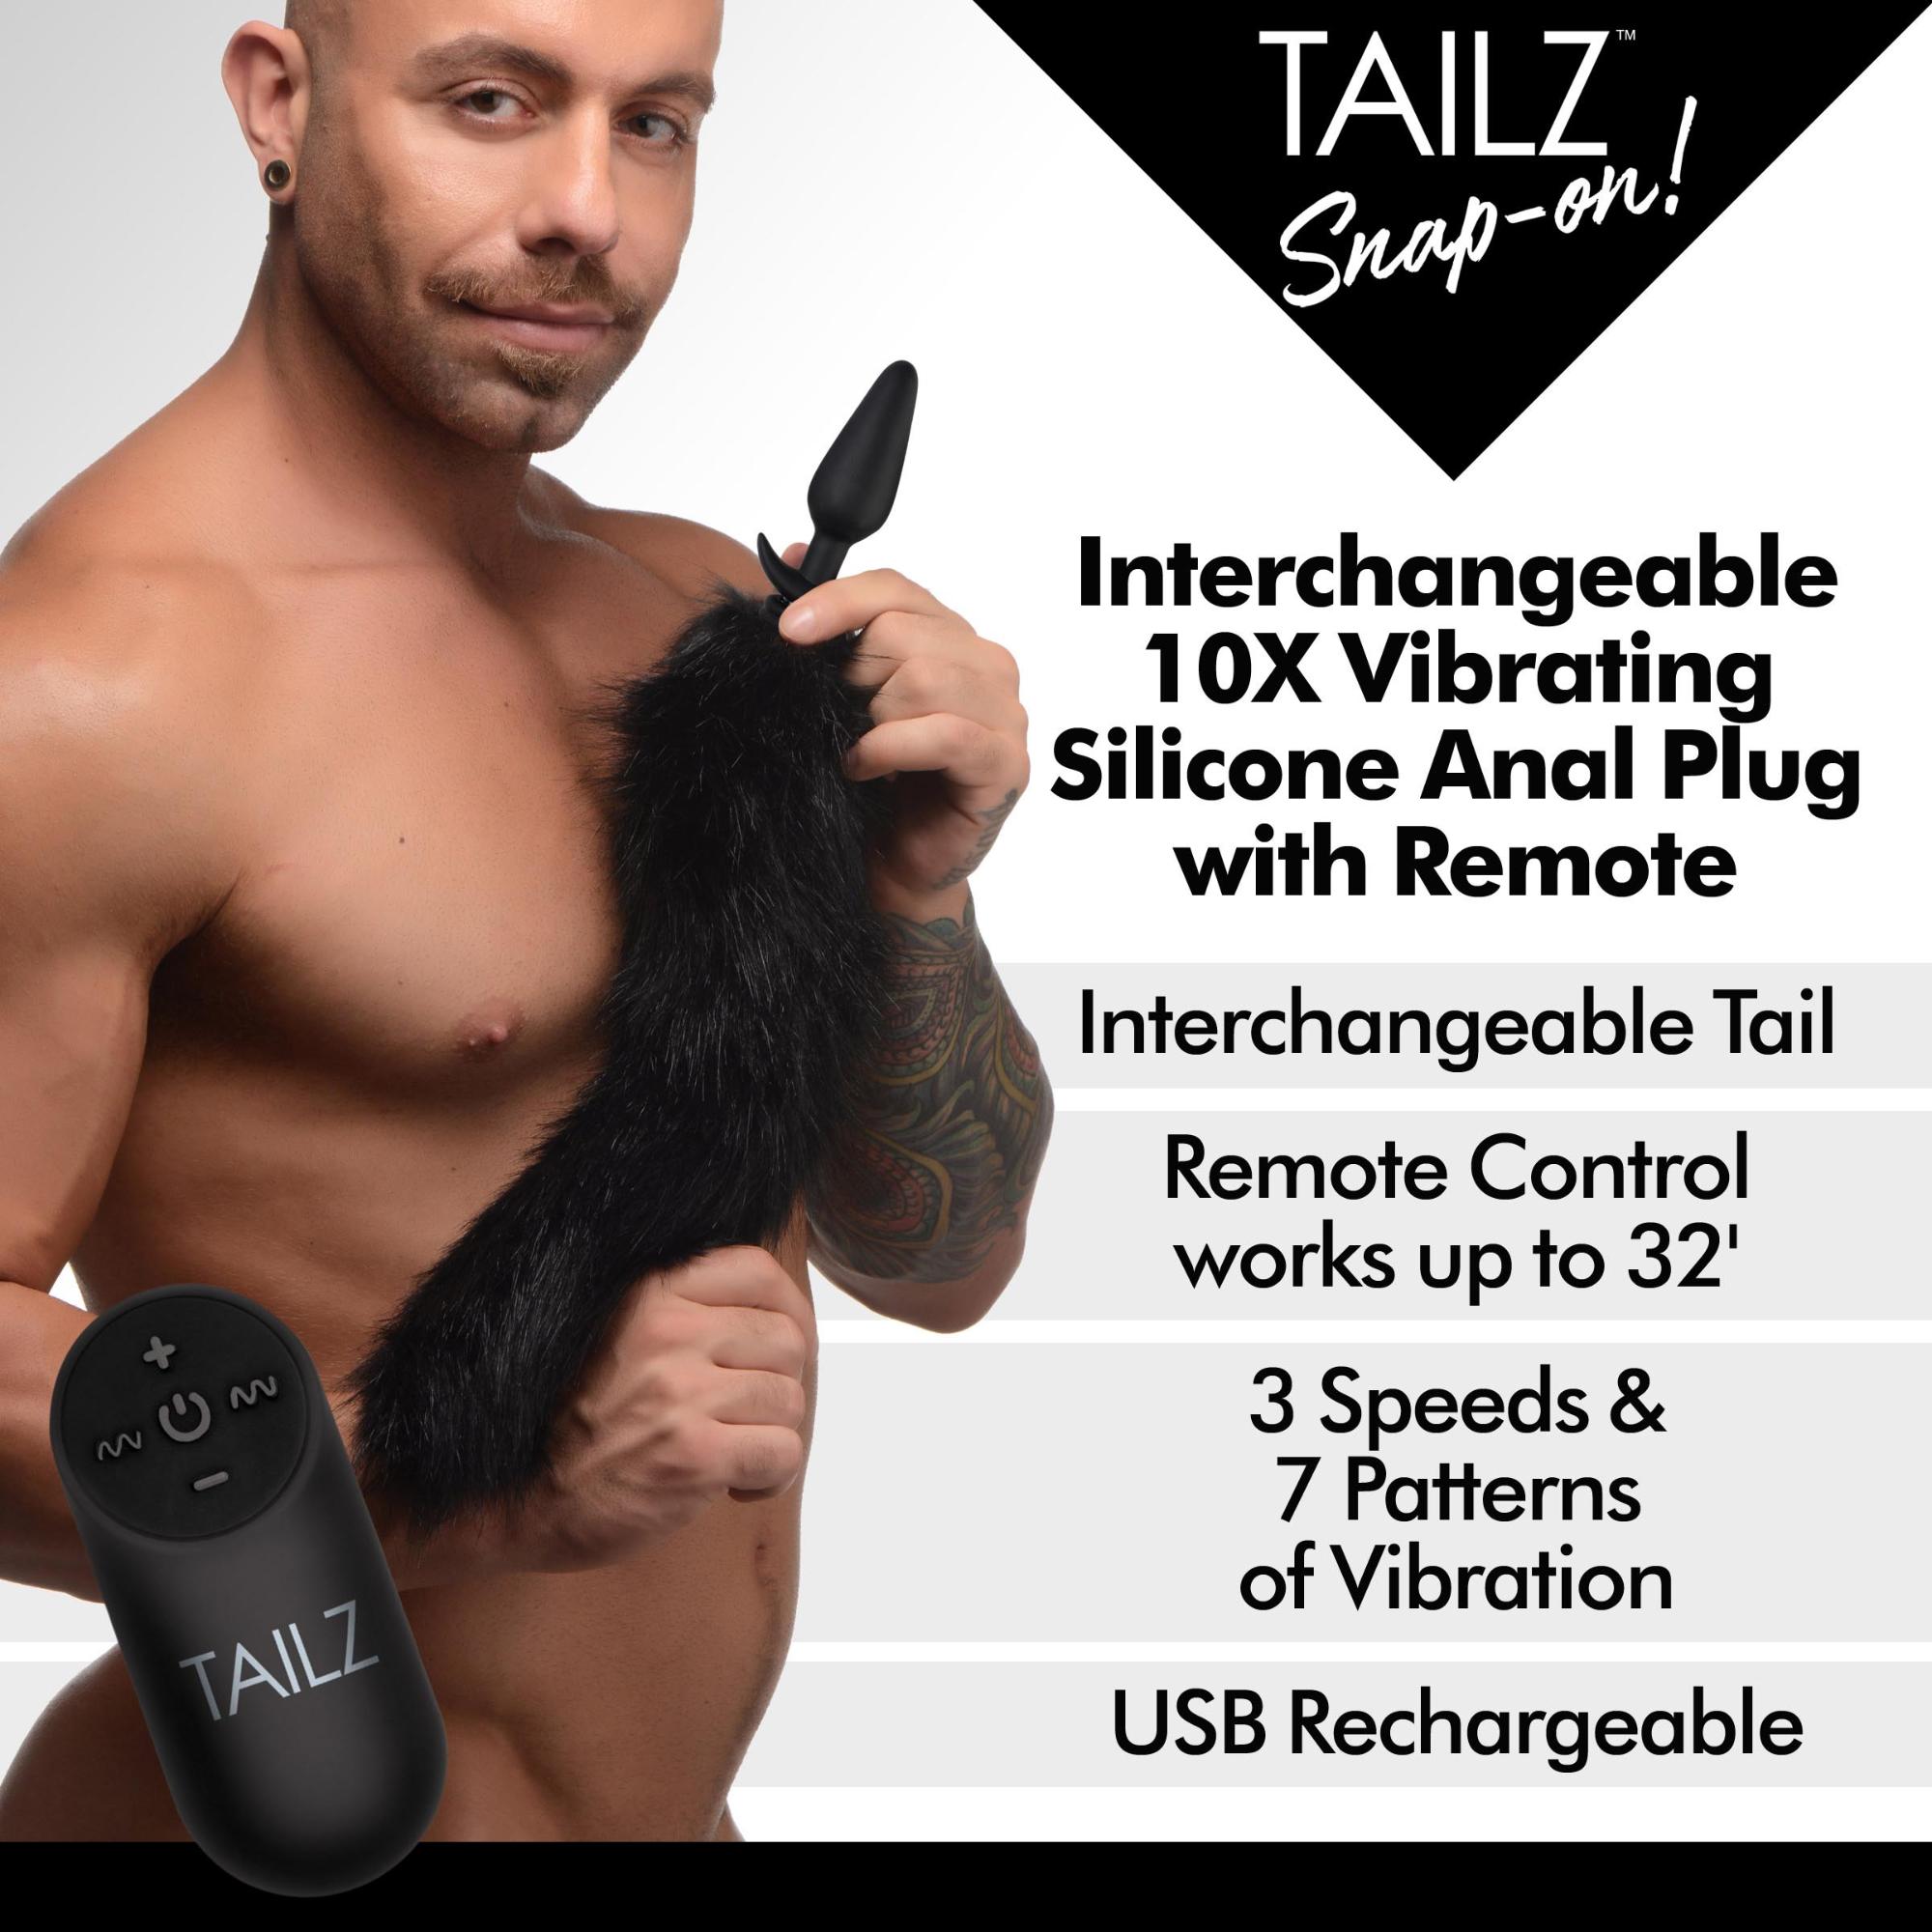 Tailz Snap-On Interchangeable 10X Vibrating Large Silicone Anal Plug with Remote